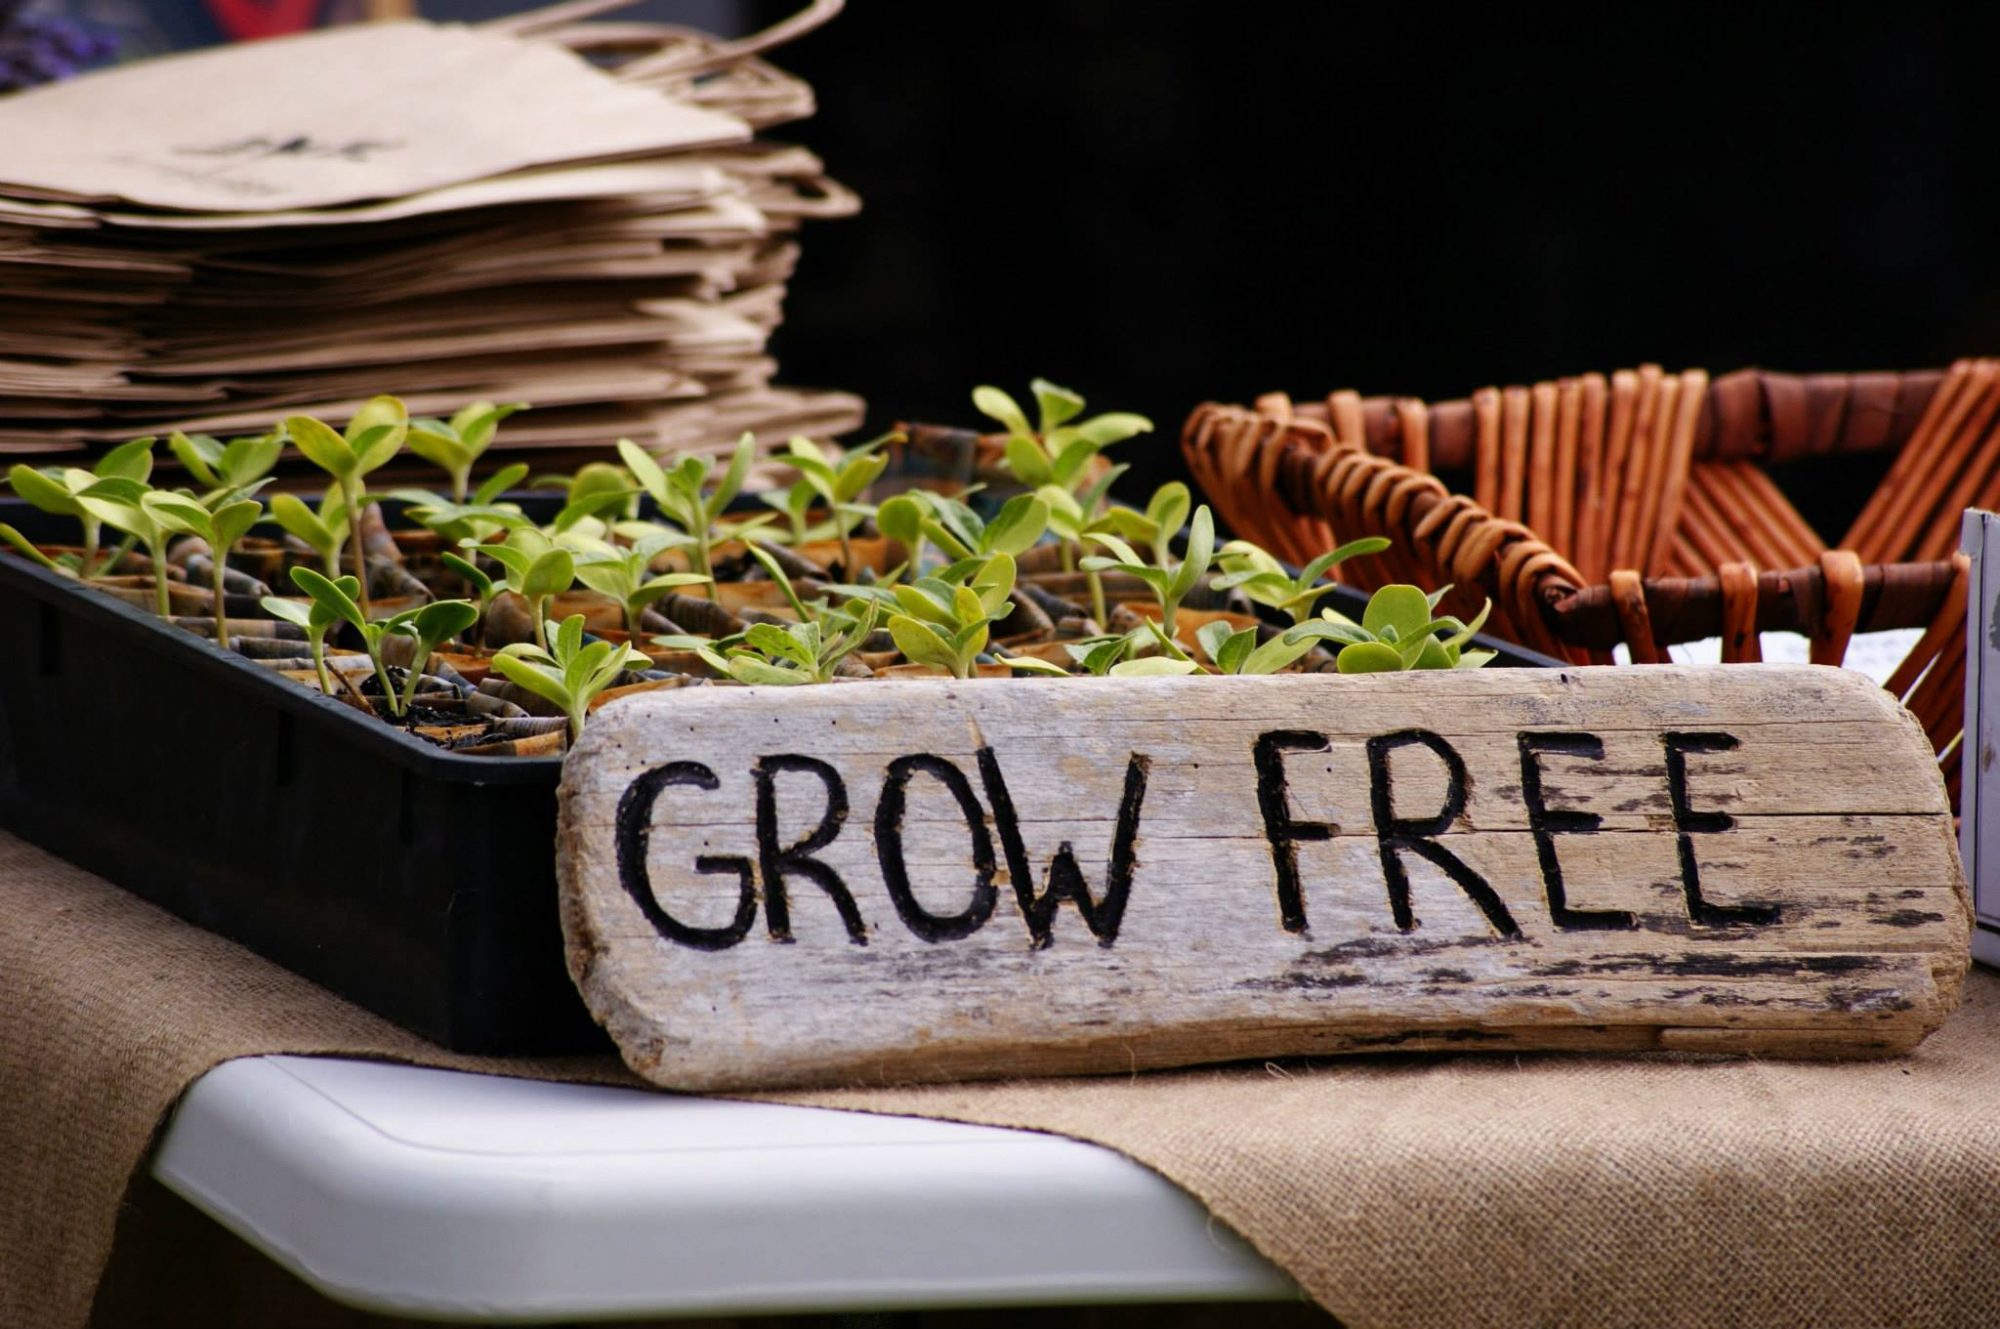 Welcome to Grow Free!